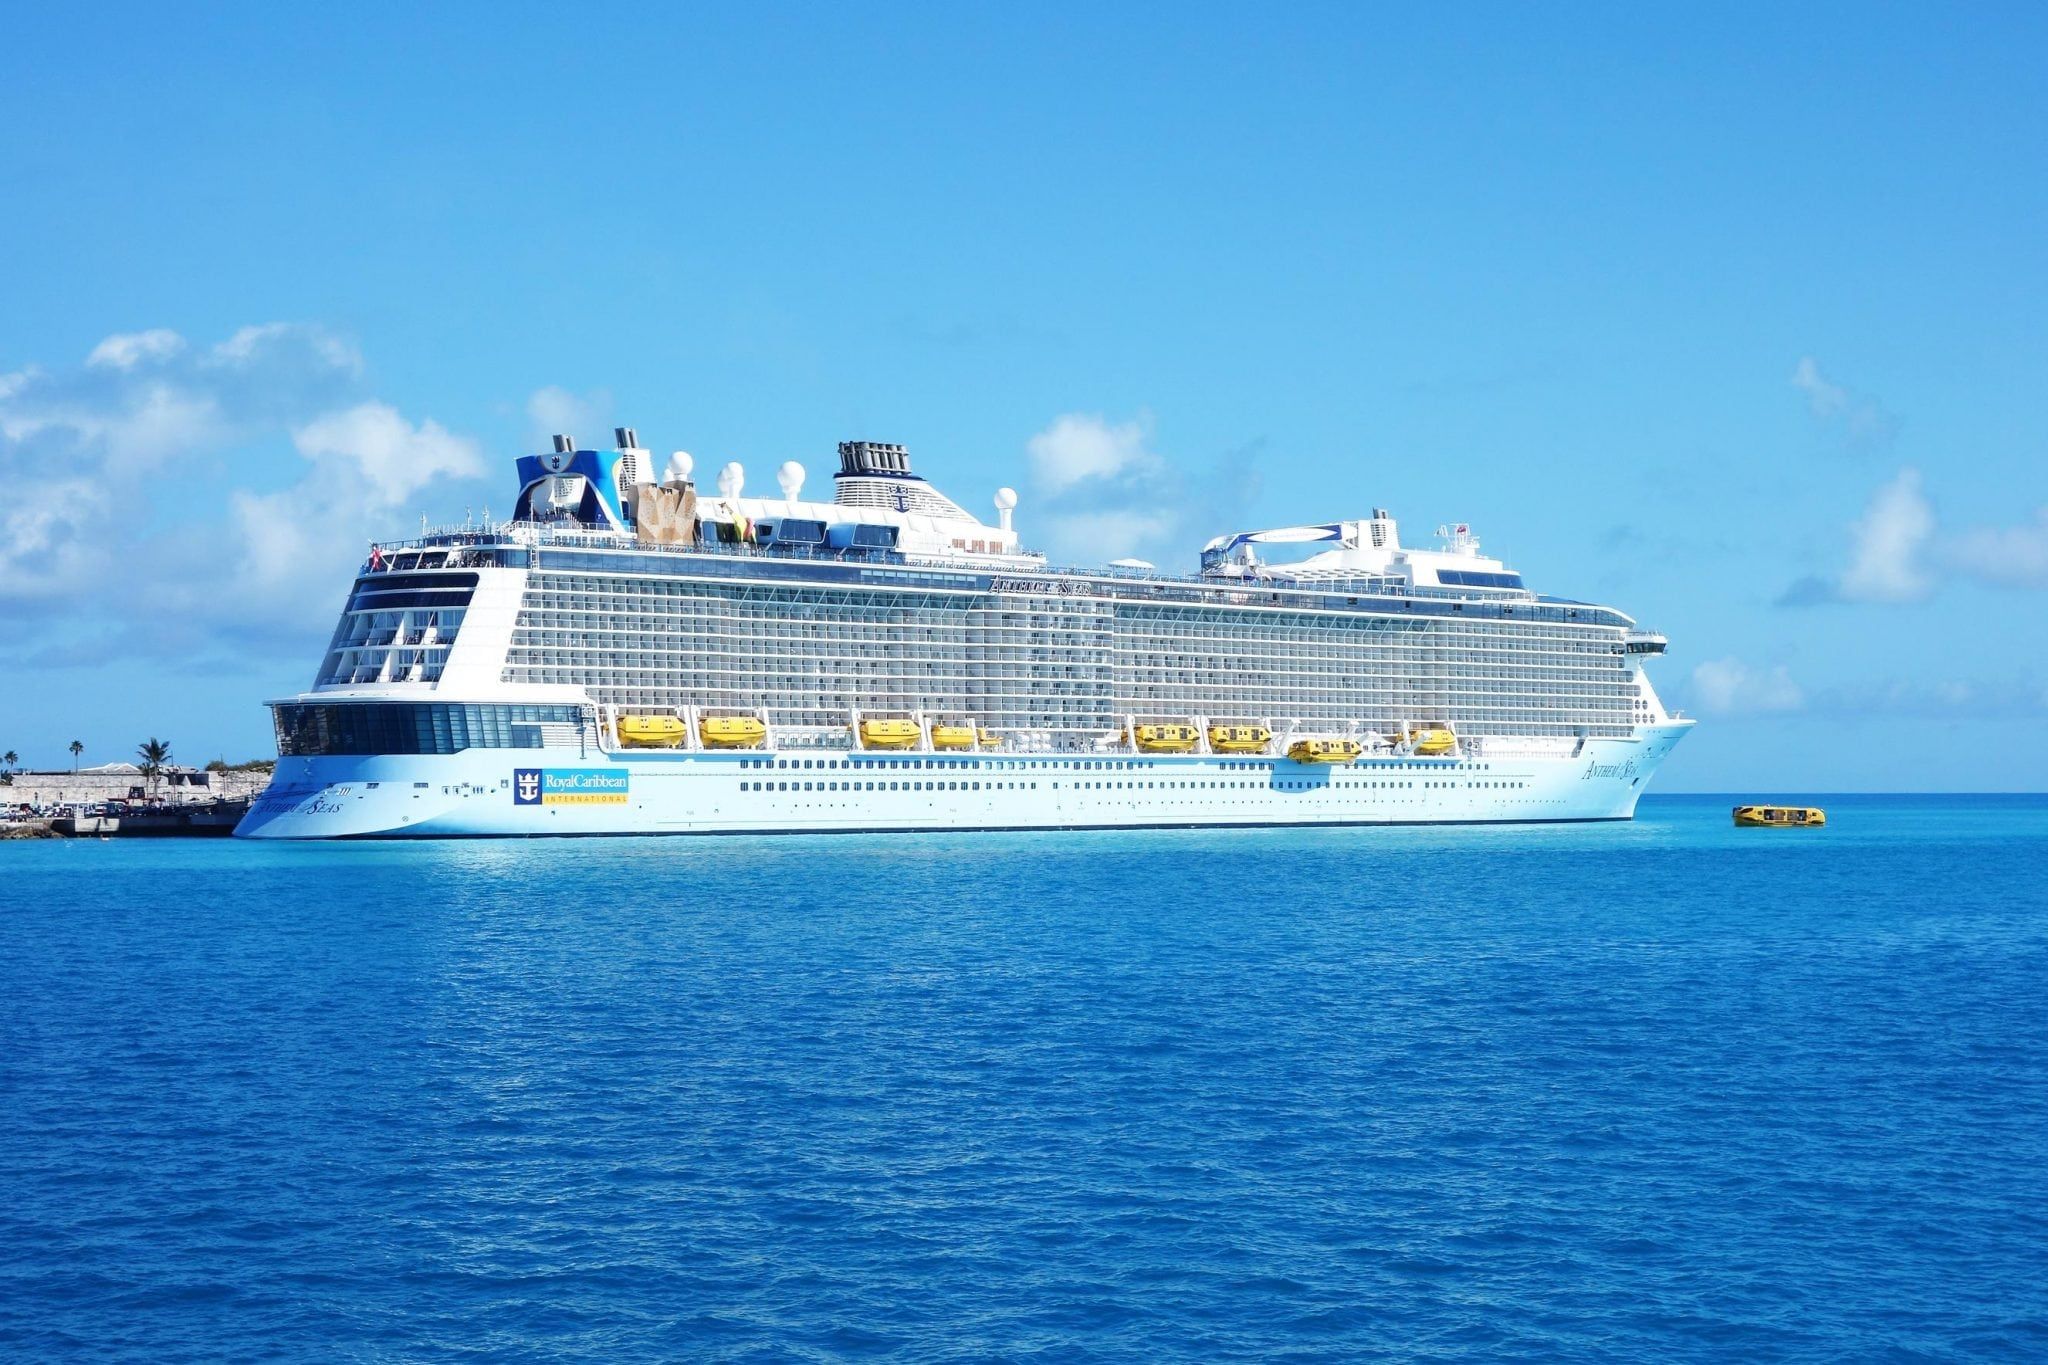 Anthem of the Seas Planning Guide